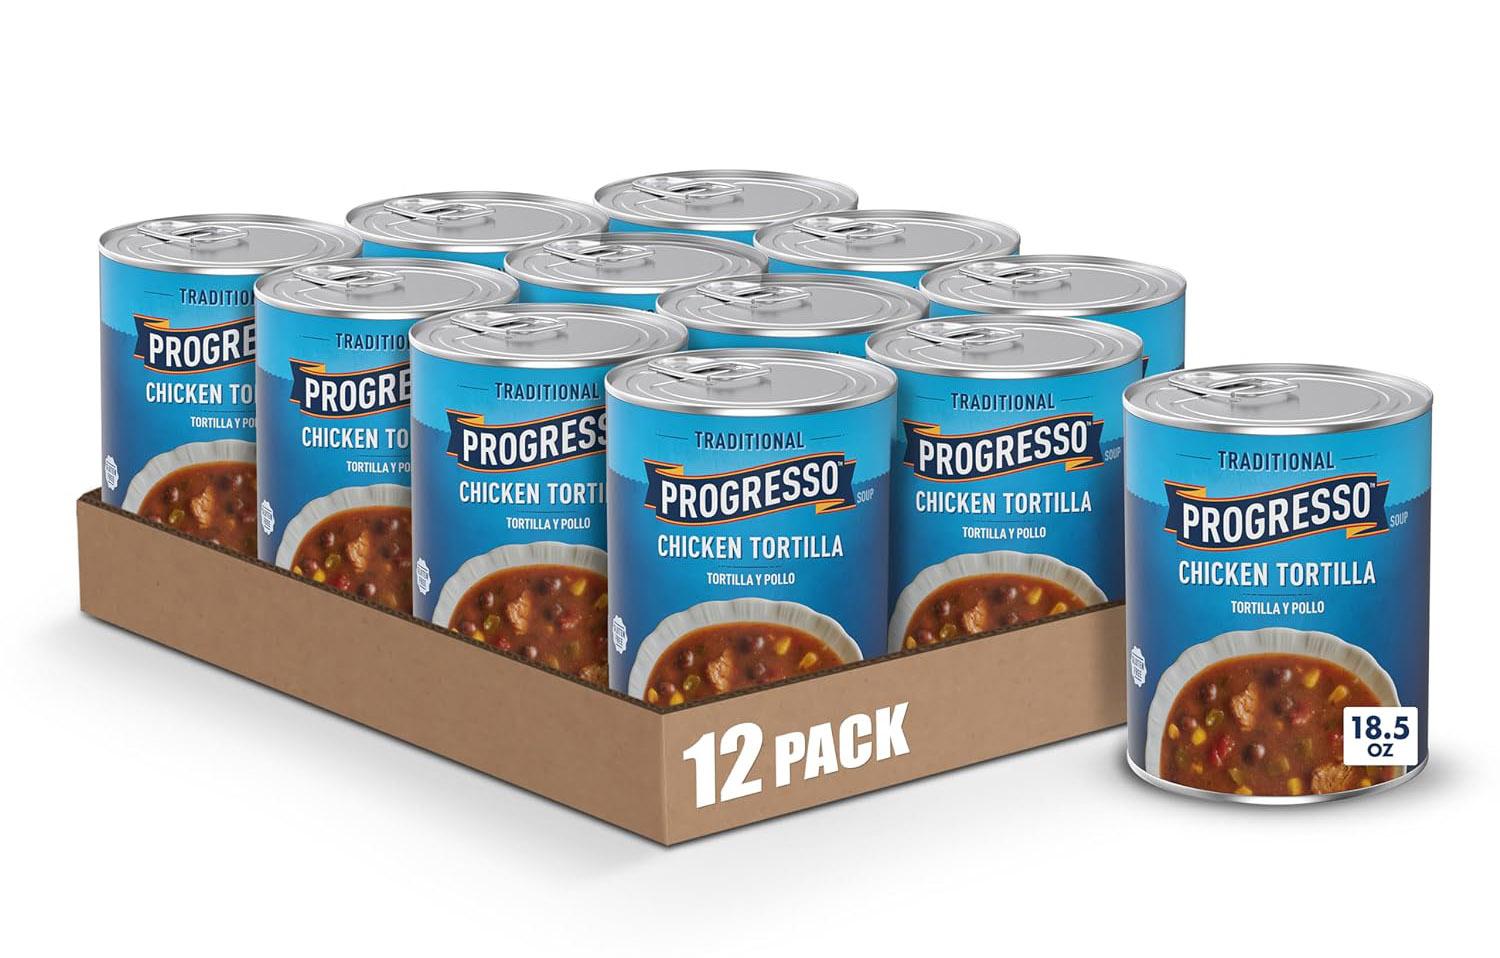 Progresso Traditional Canned Soup Chicken Tortilla 12 Pack for $19.79